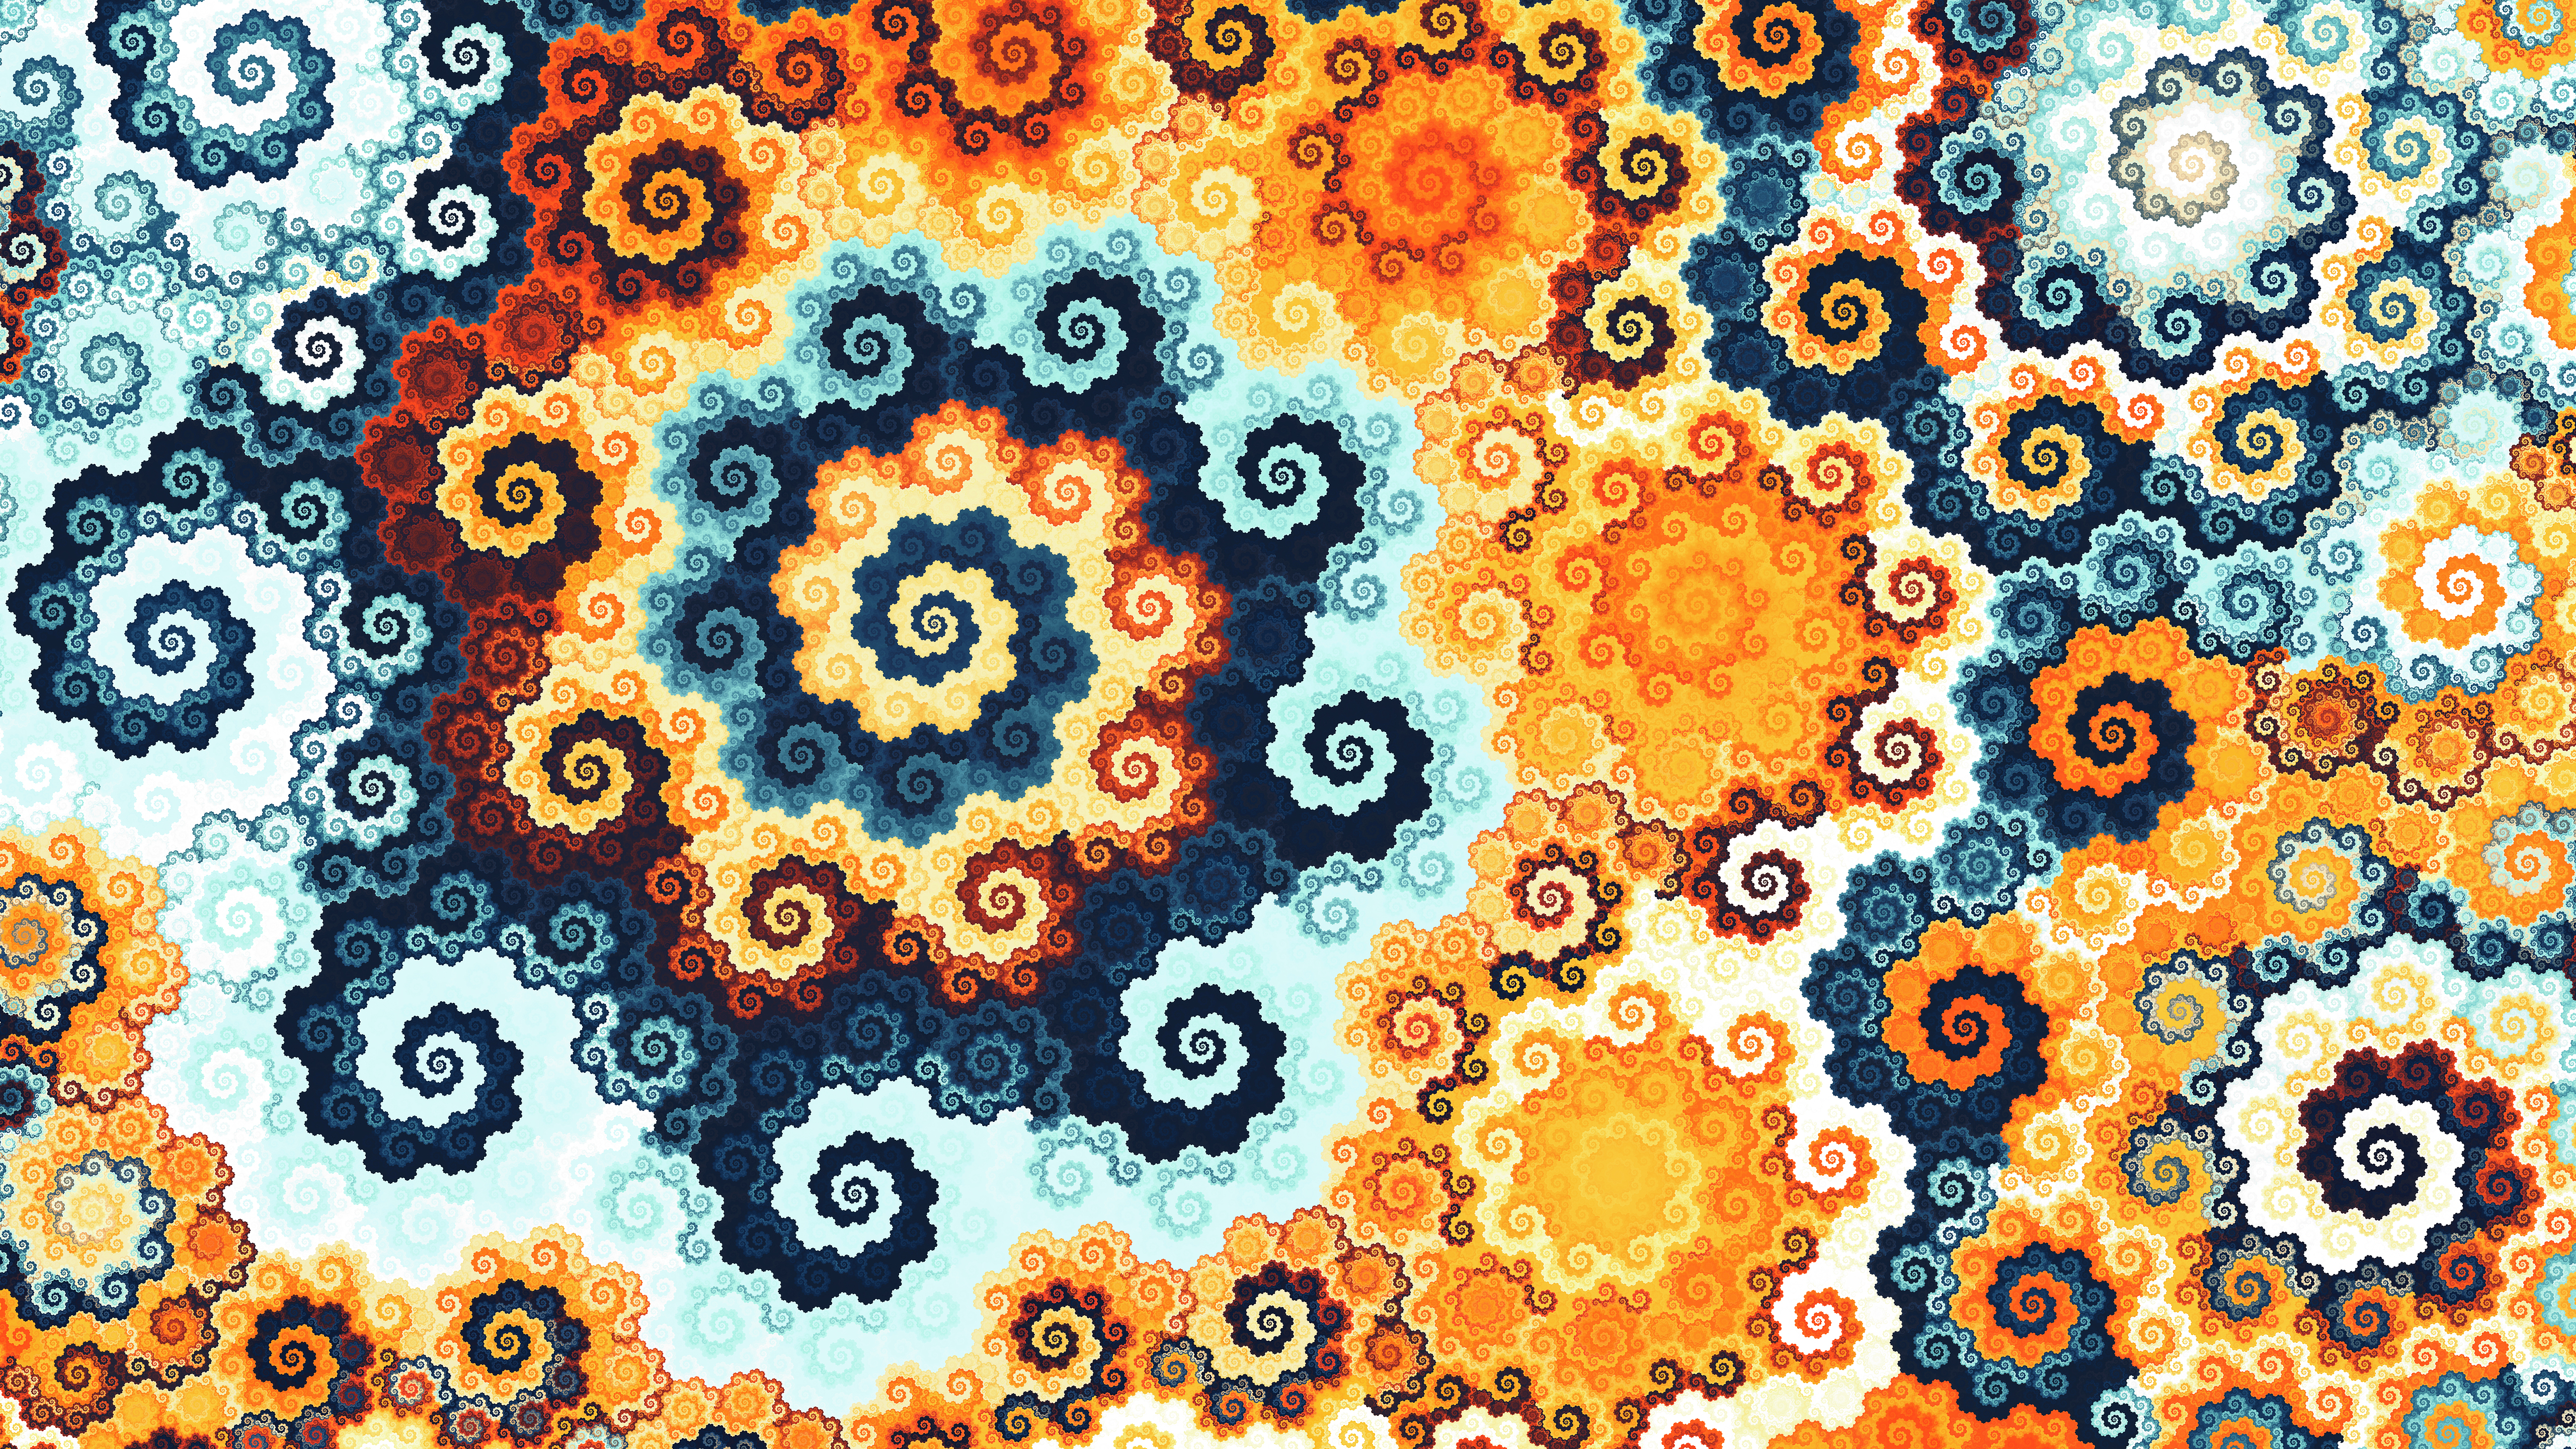 fractal, pattern, abstract, multicolored, motley, swirling, involute